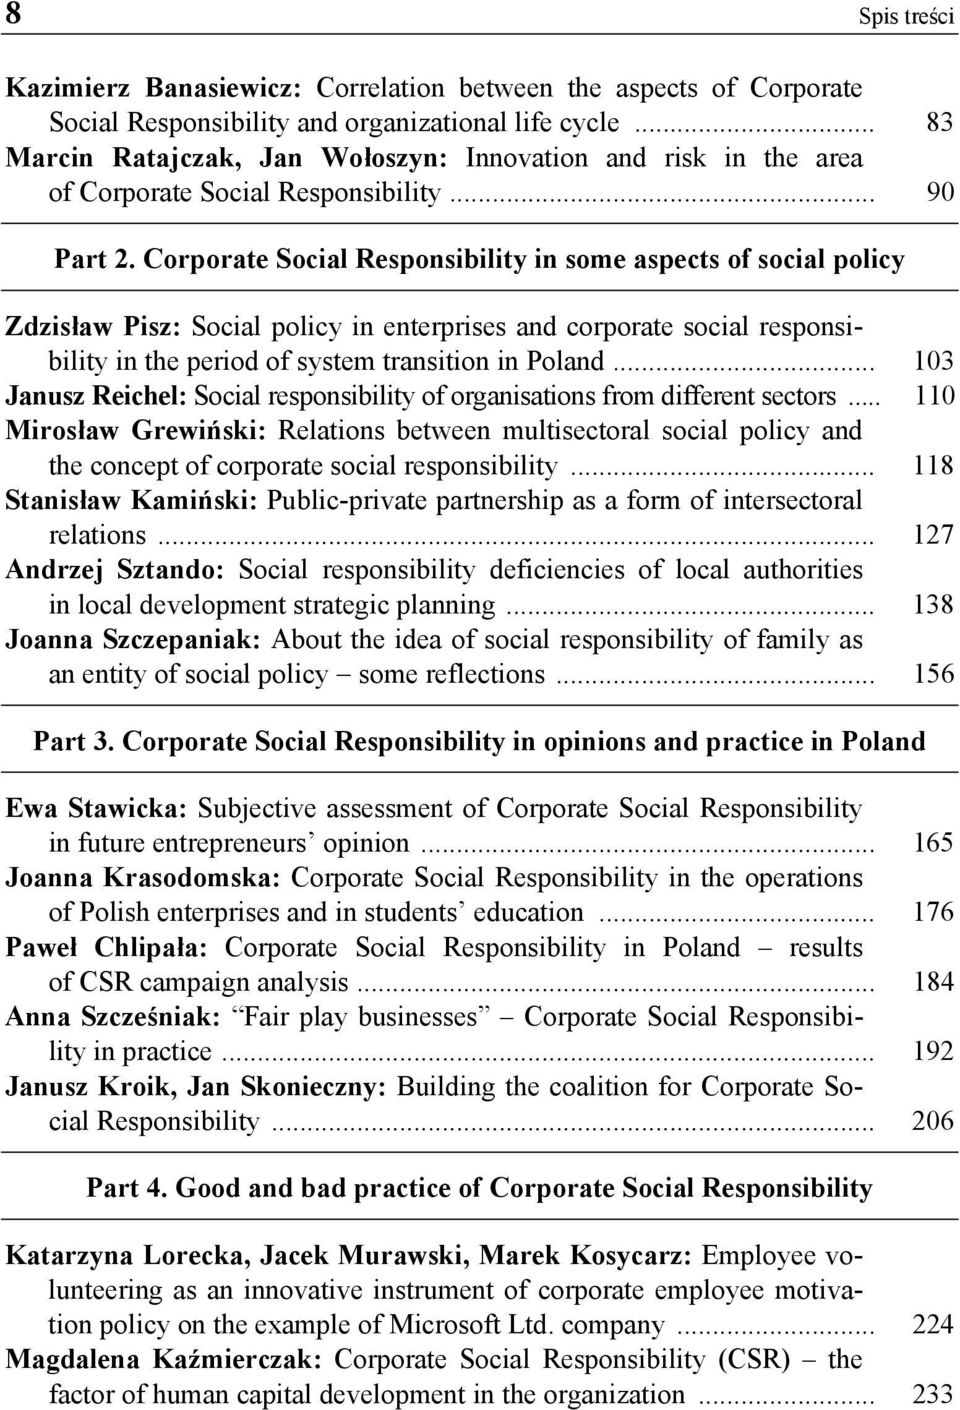 Corporate Social Responsibility in some aspects of social policy Zdzisław Pisz: Social policy in enterprises and corporate social responsibility in the period of system transition in Poland.